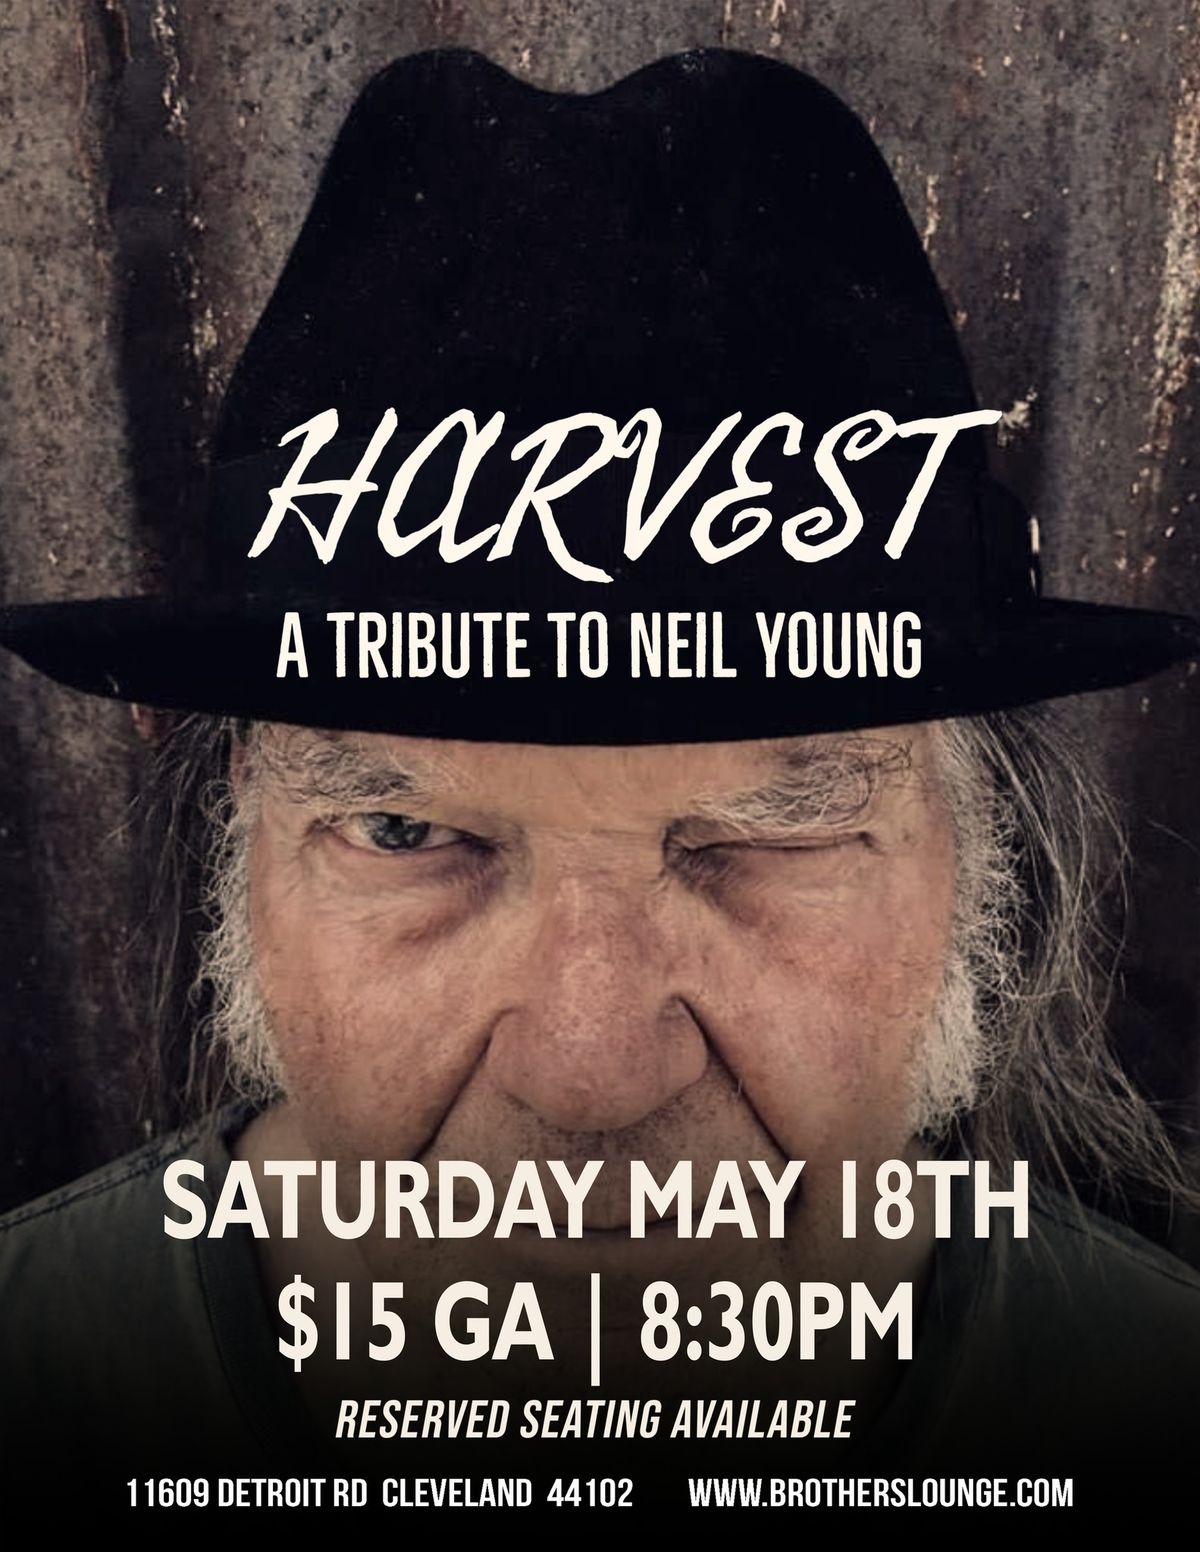 Harvest at Brothers Lounge - Saturday May 18 8:30pm